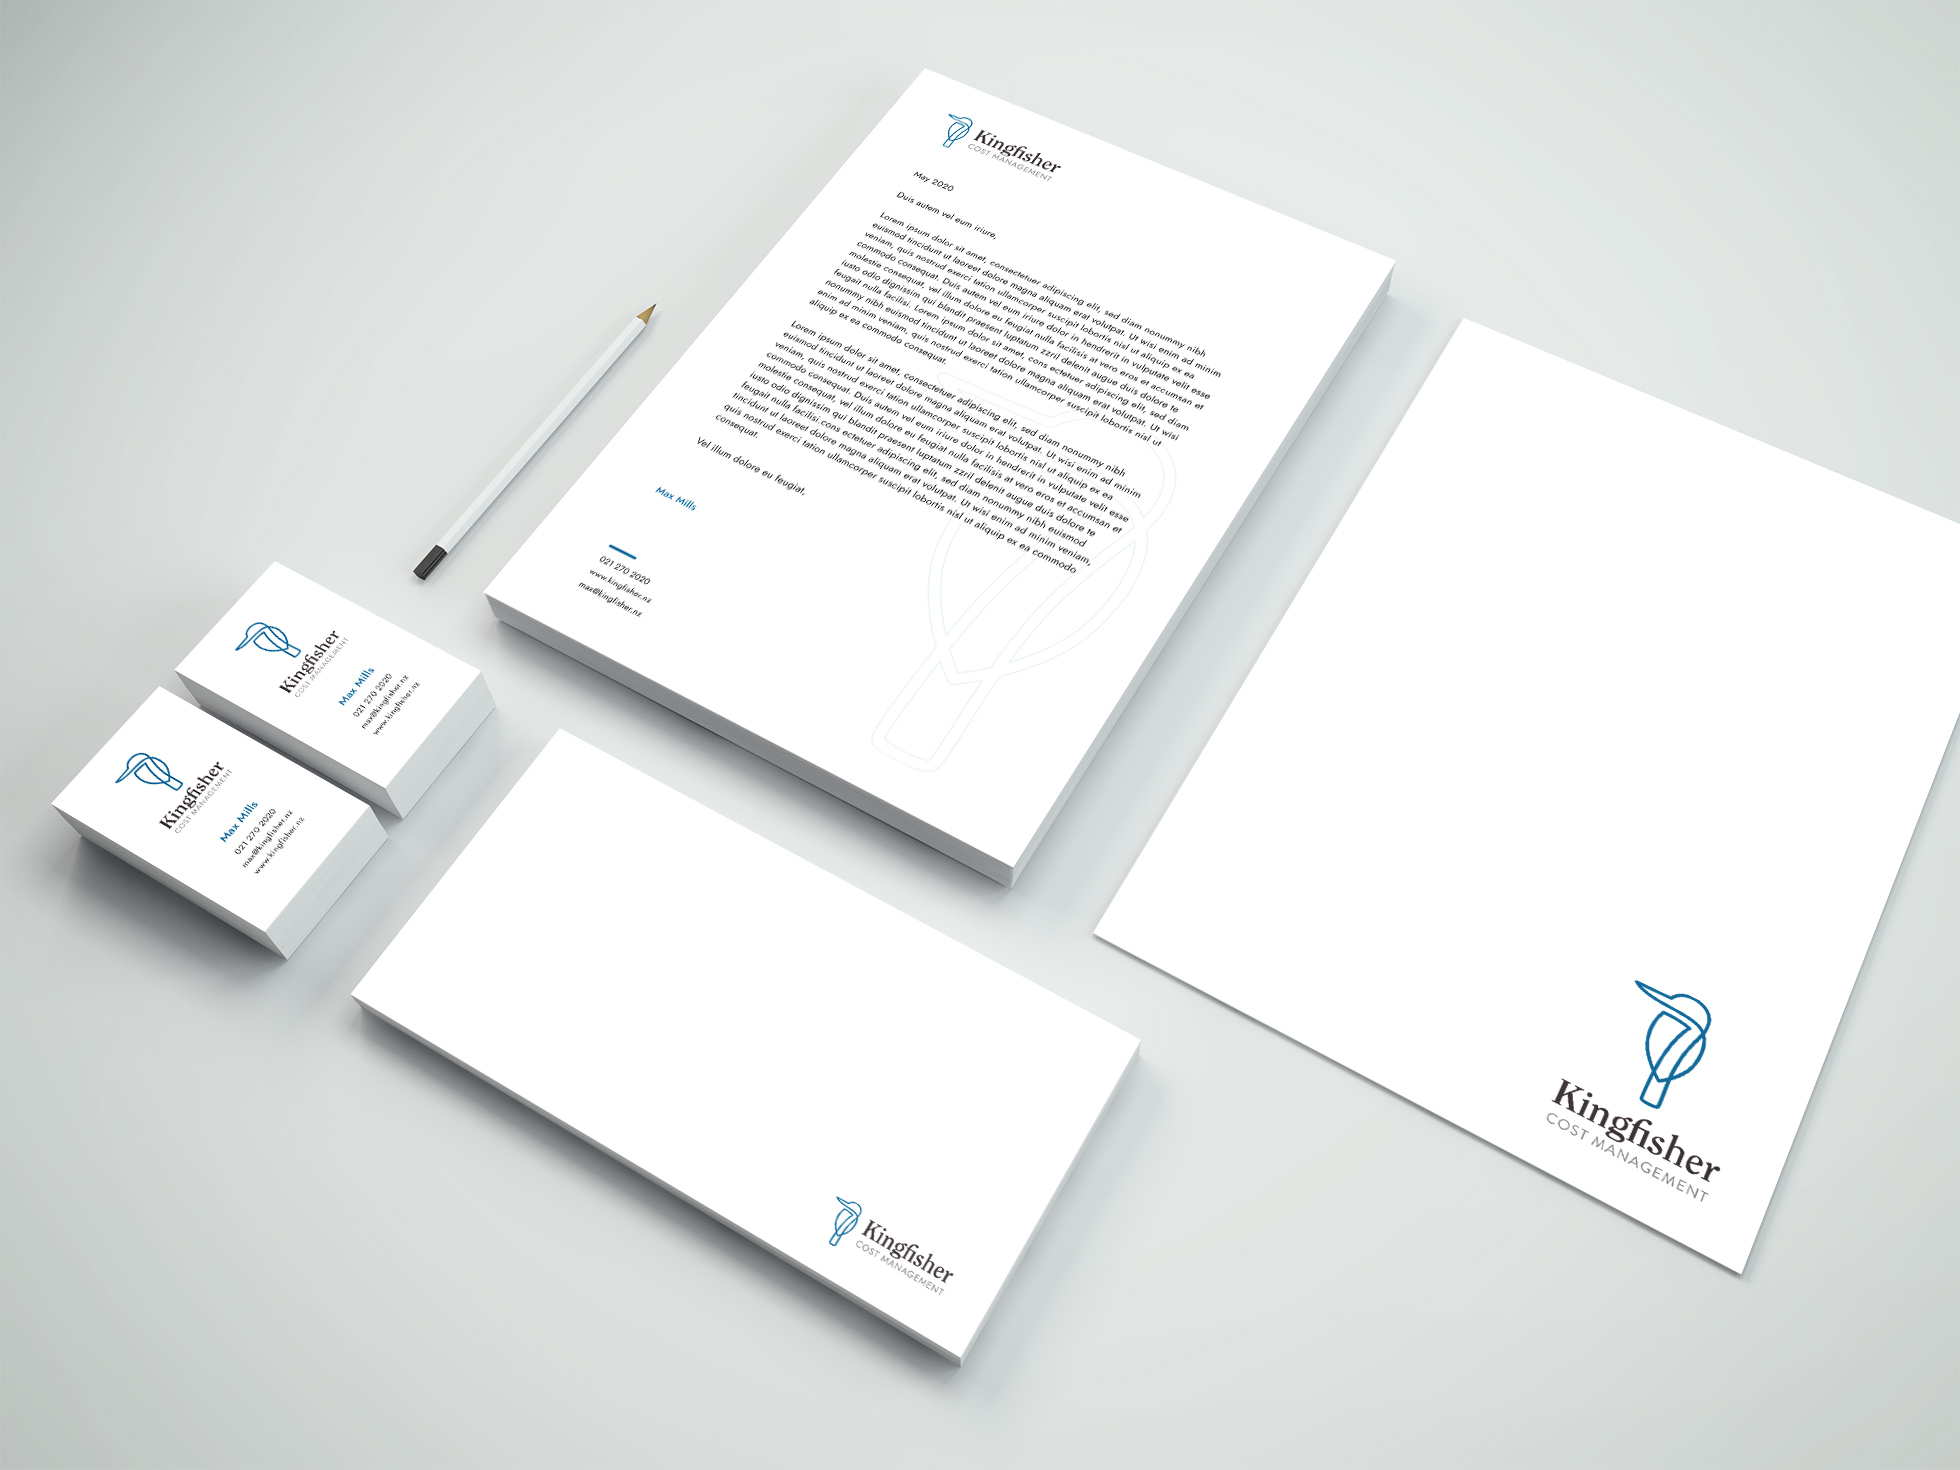 Kingfisher Cost Management stationery design